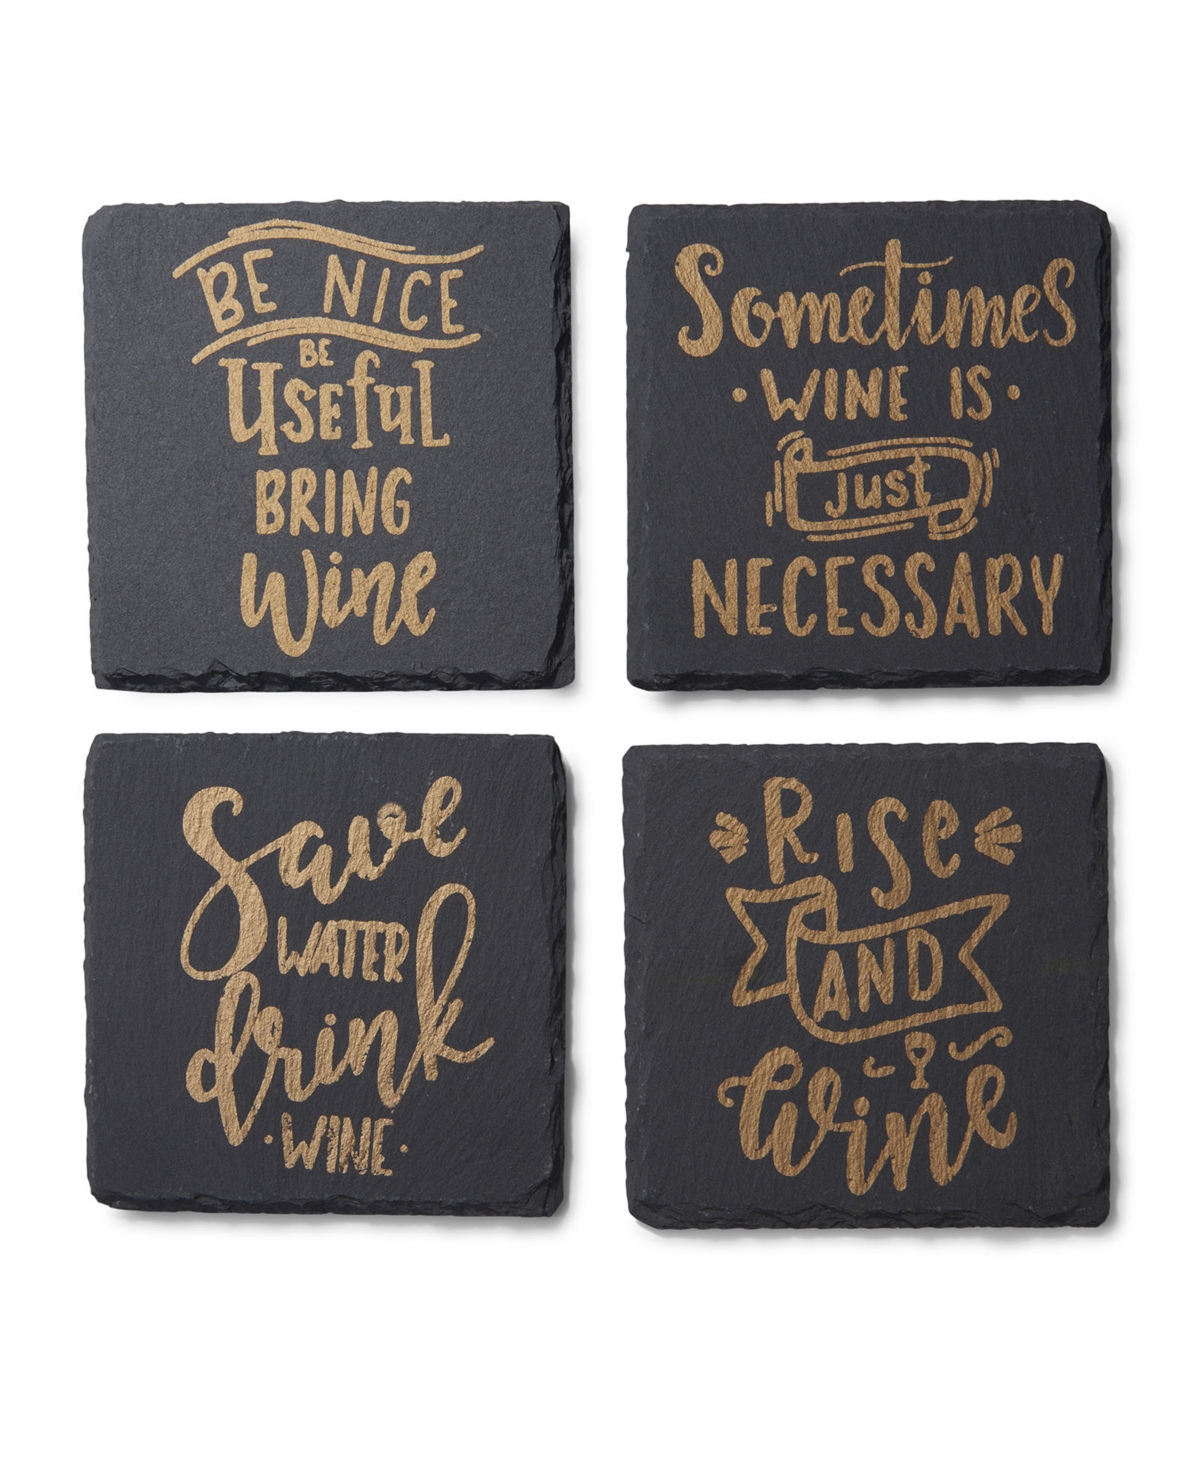 American Atelier 4 X 4" Wine Is Necessary Slate Coasters Square Set, 4 Piece In Black